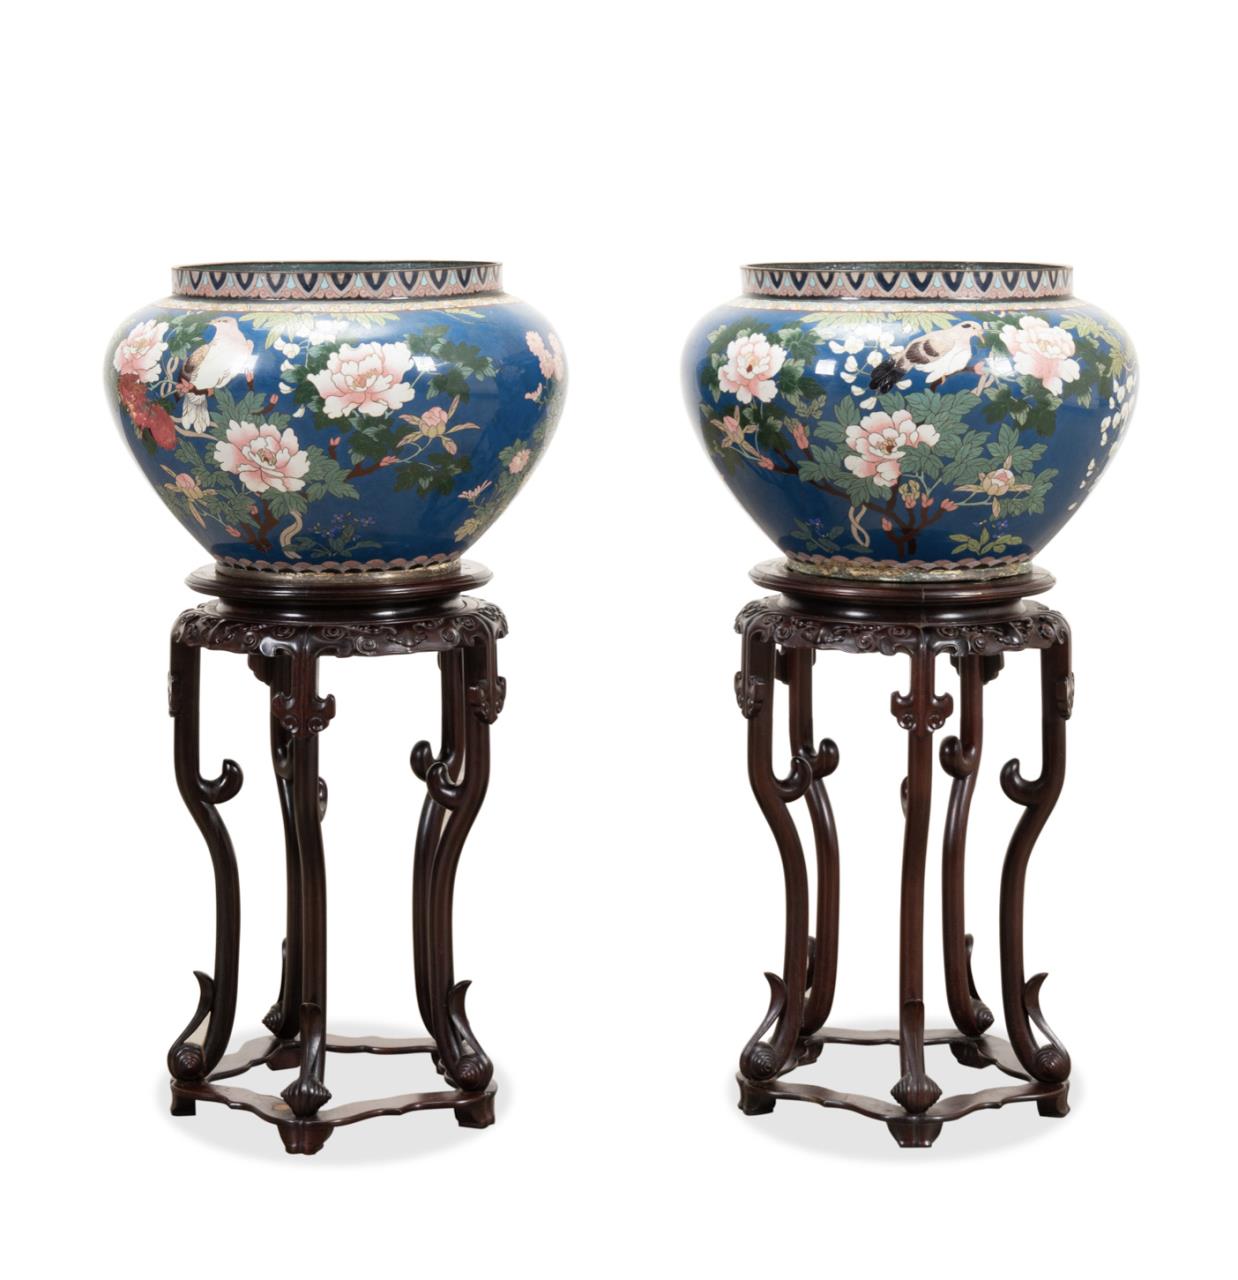 PAIR CHINESE CLOISONNE URNS ON 3b40ff